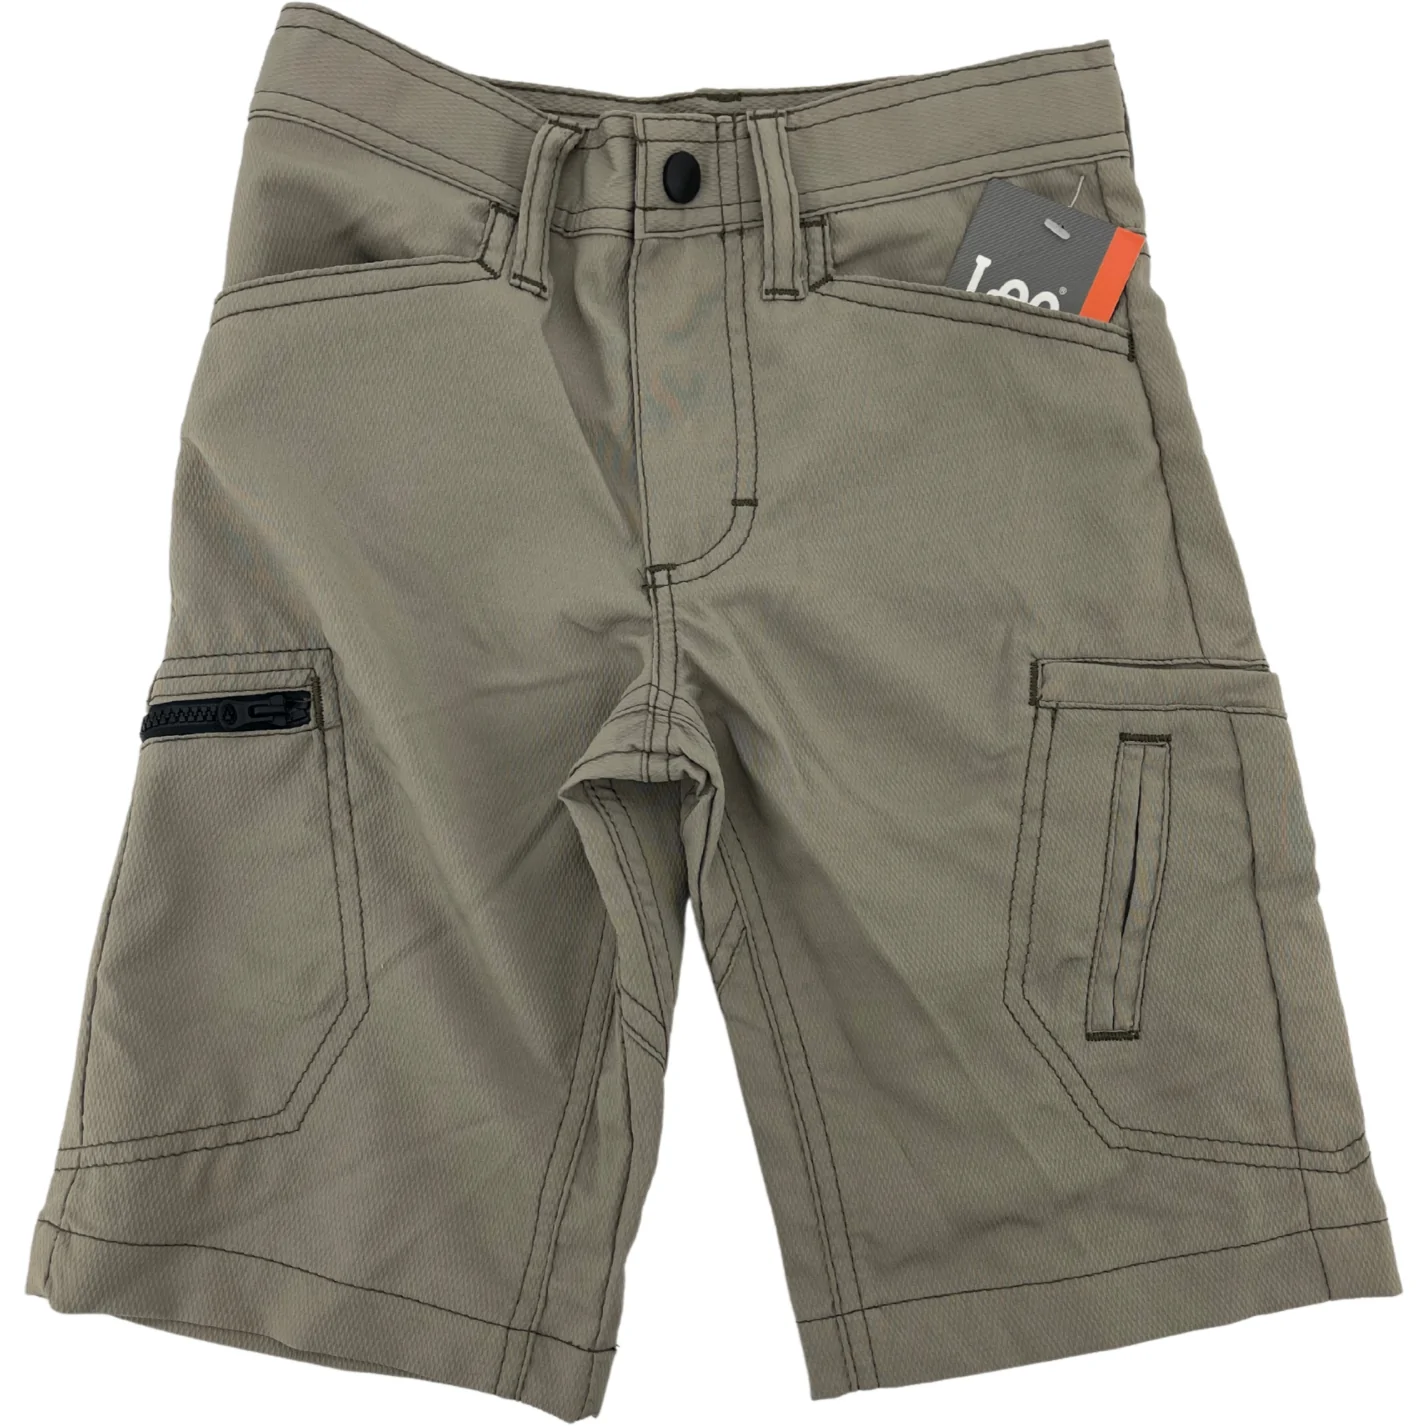 Lee Dungarees Boy's Shorts / Olive Green / Various Sizes